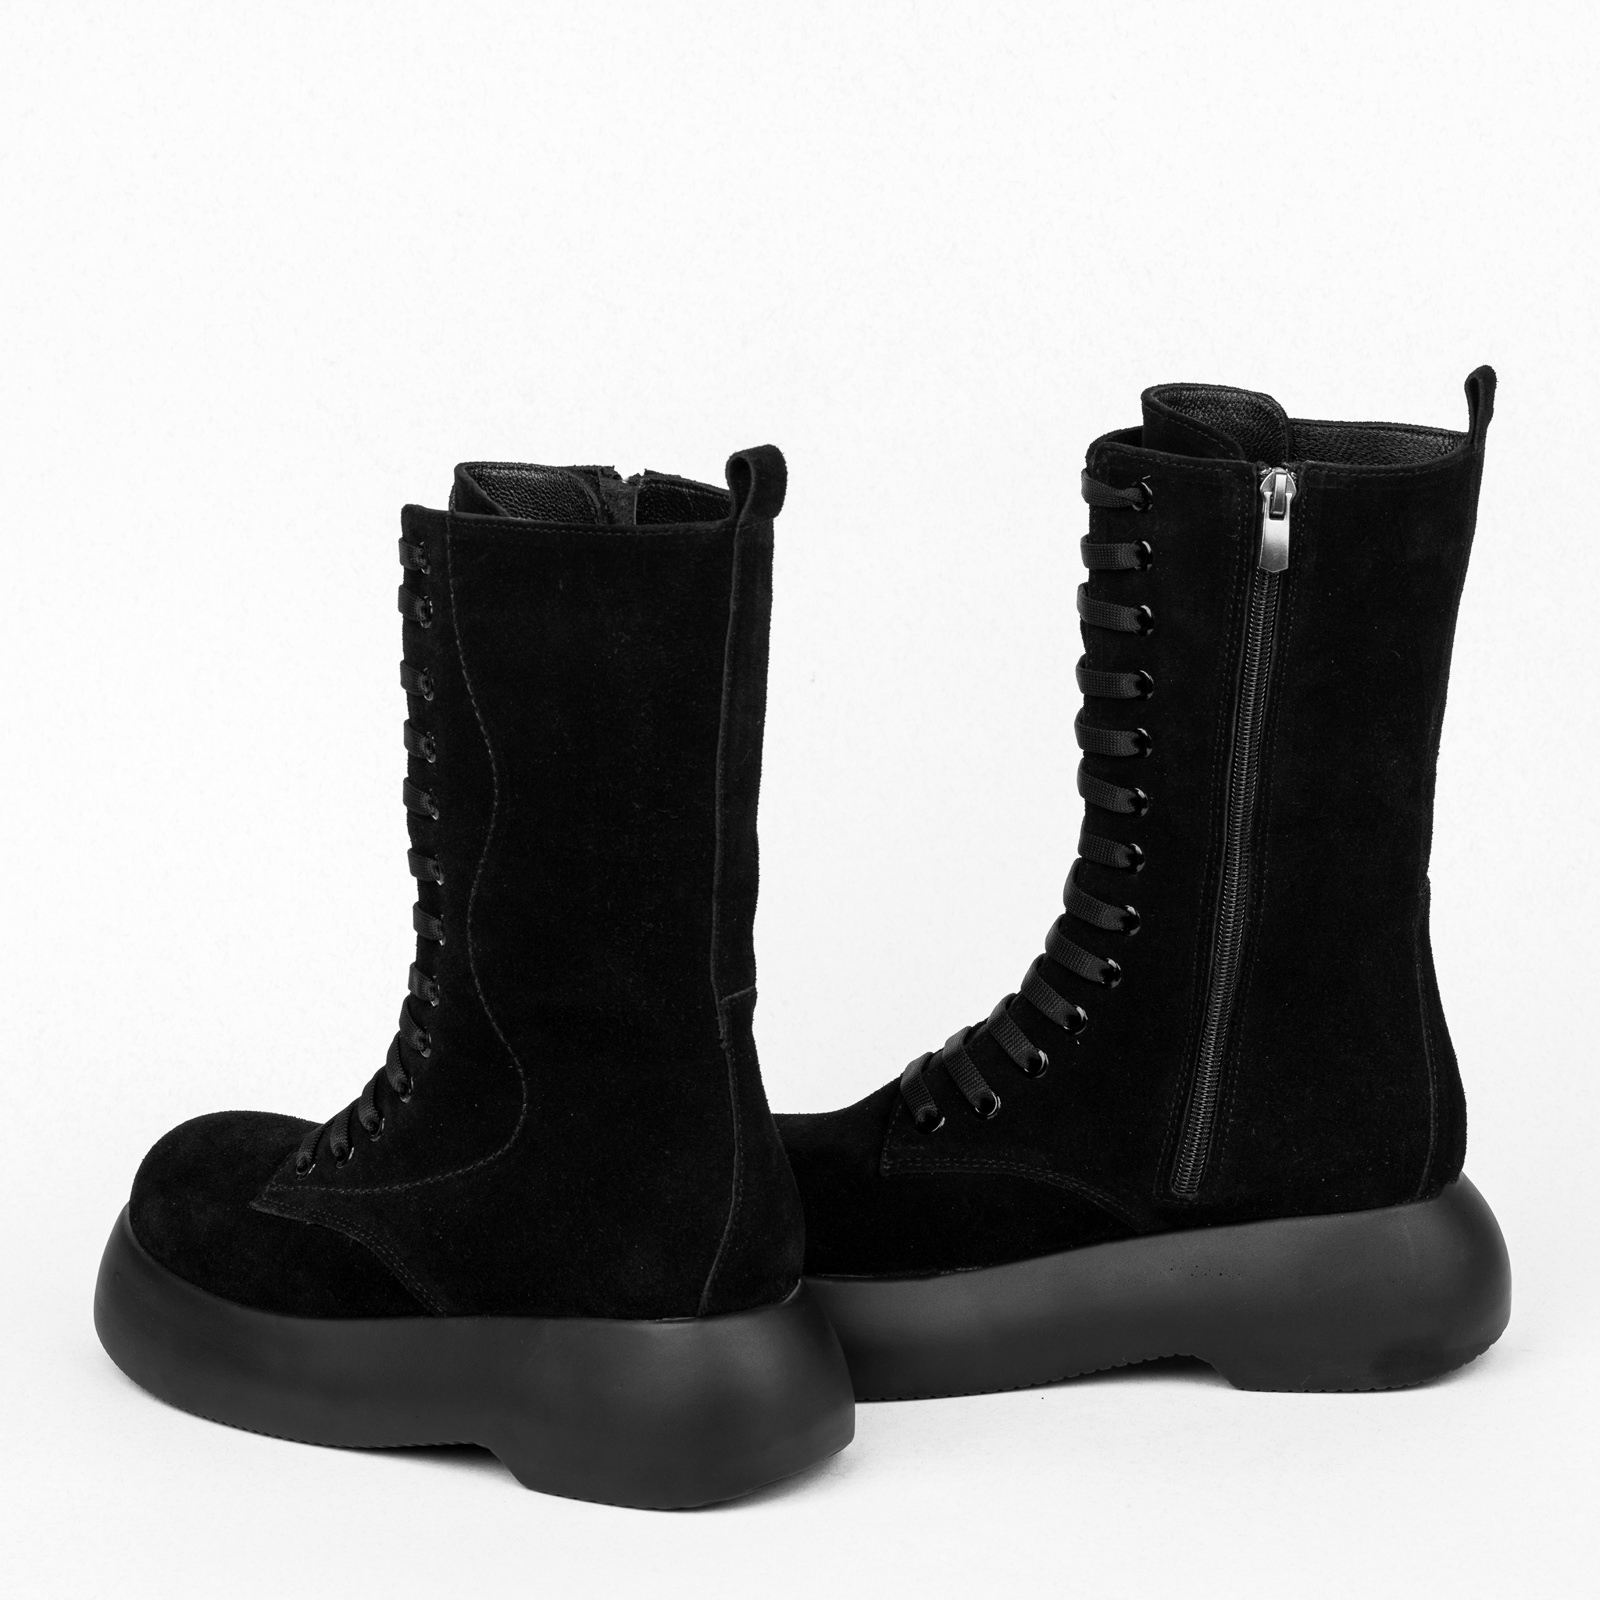 Leather ankle boots B155 - BLACK